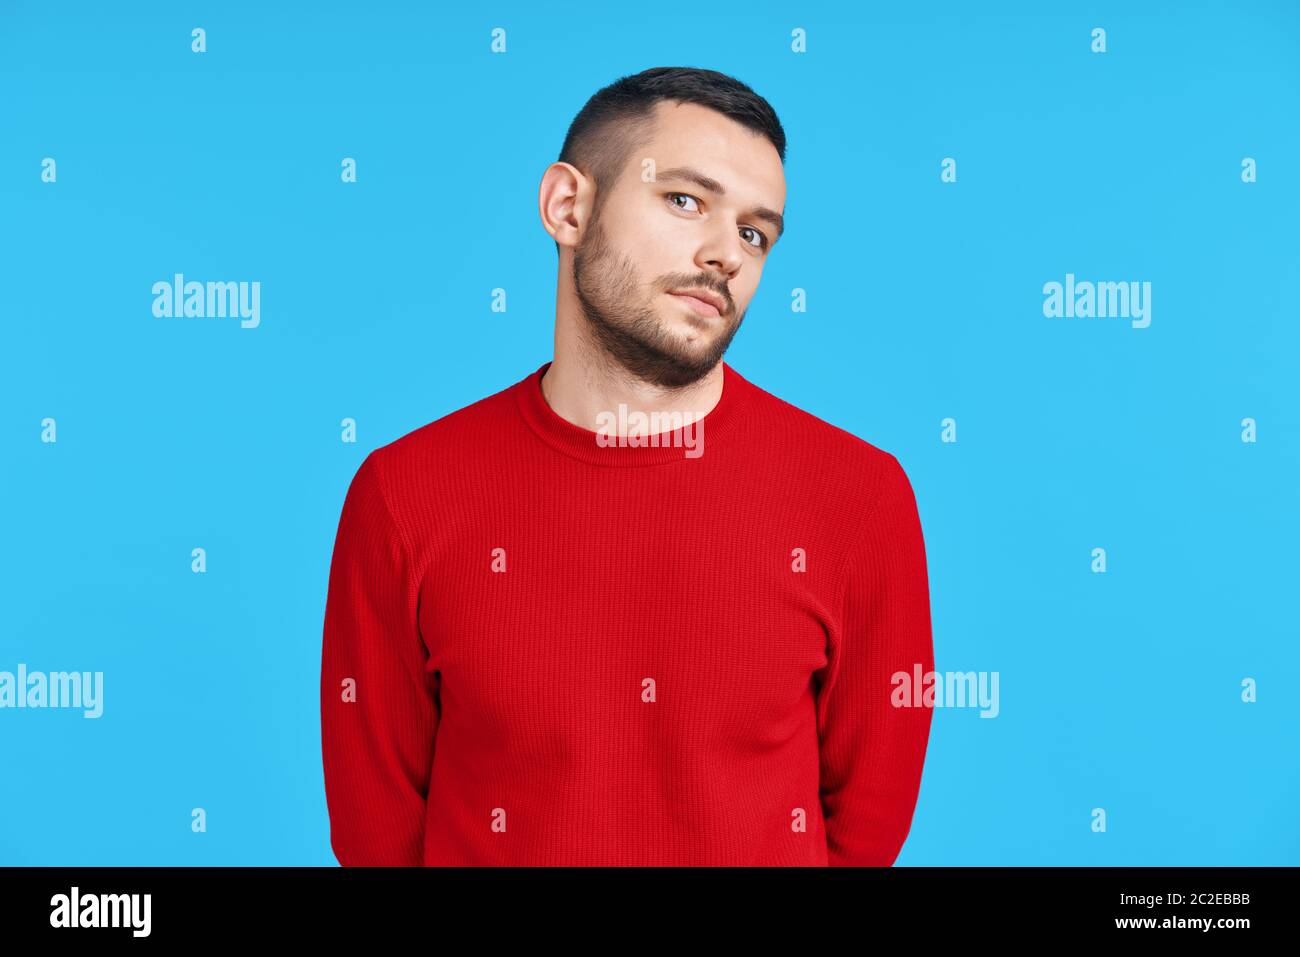 Shy confused man portrait on blue background Stock Photo